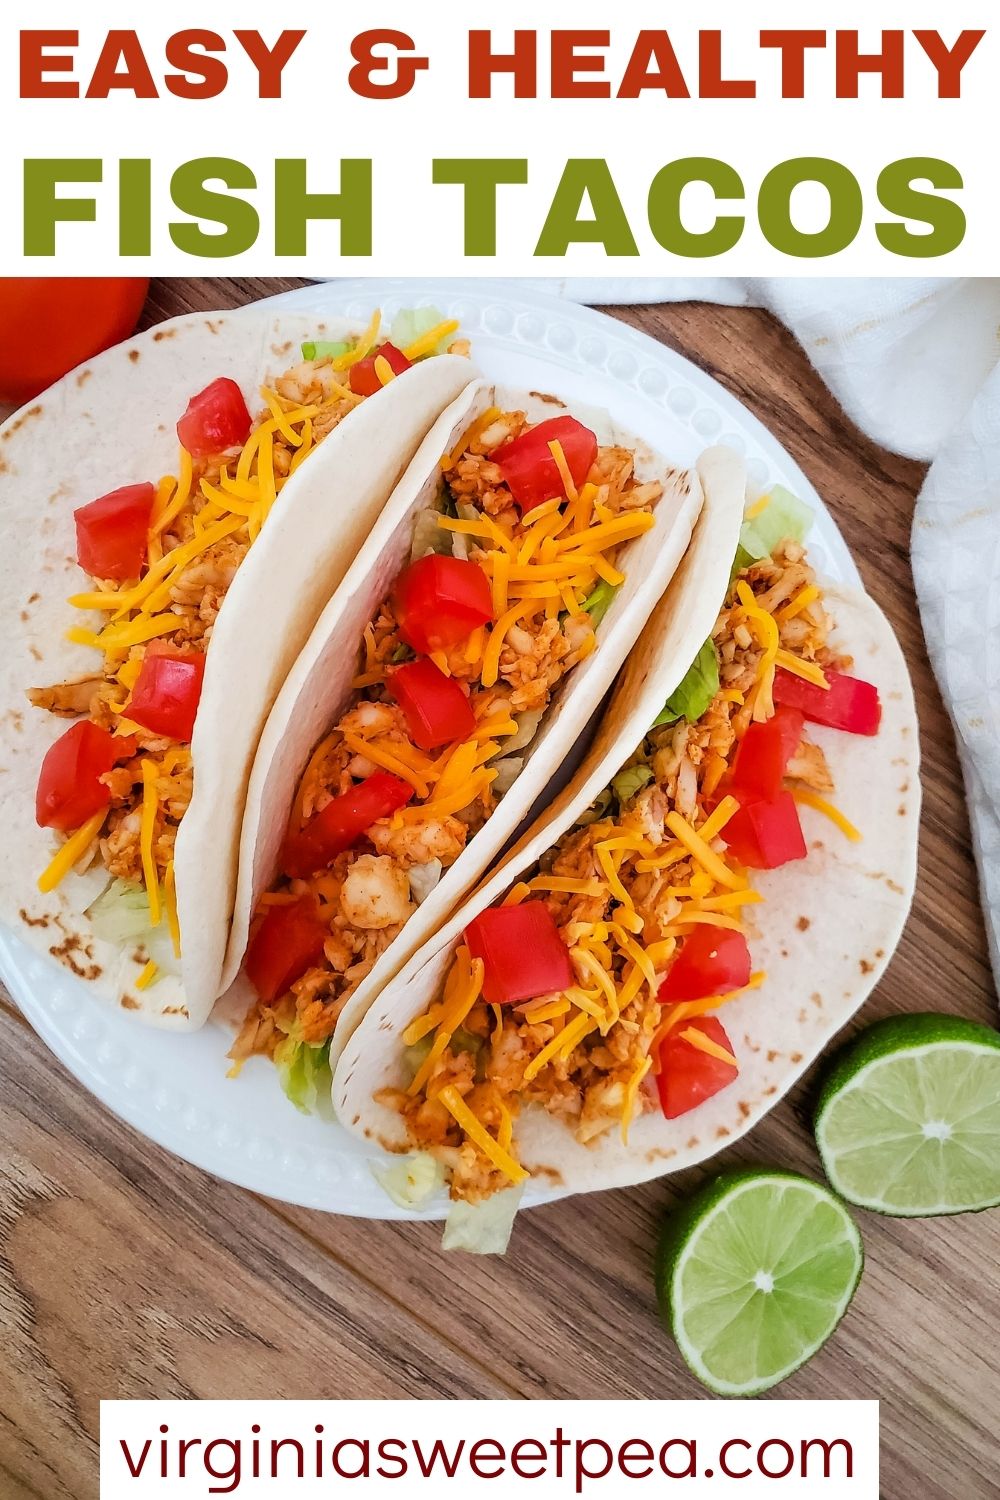 Three fish tacos on a white plate